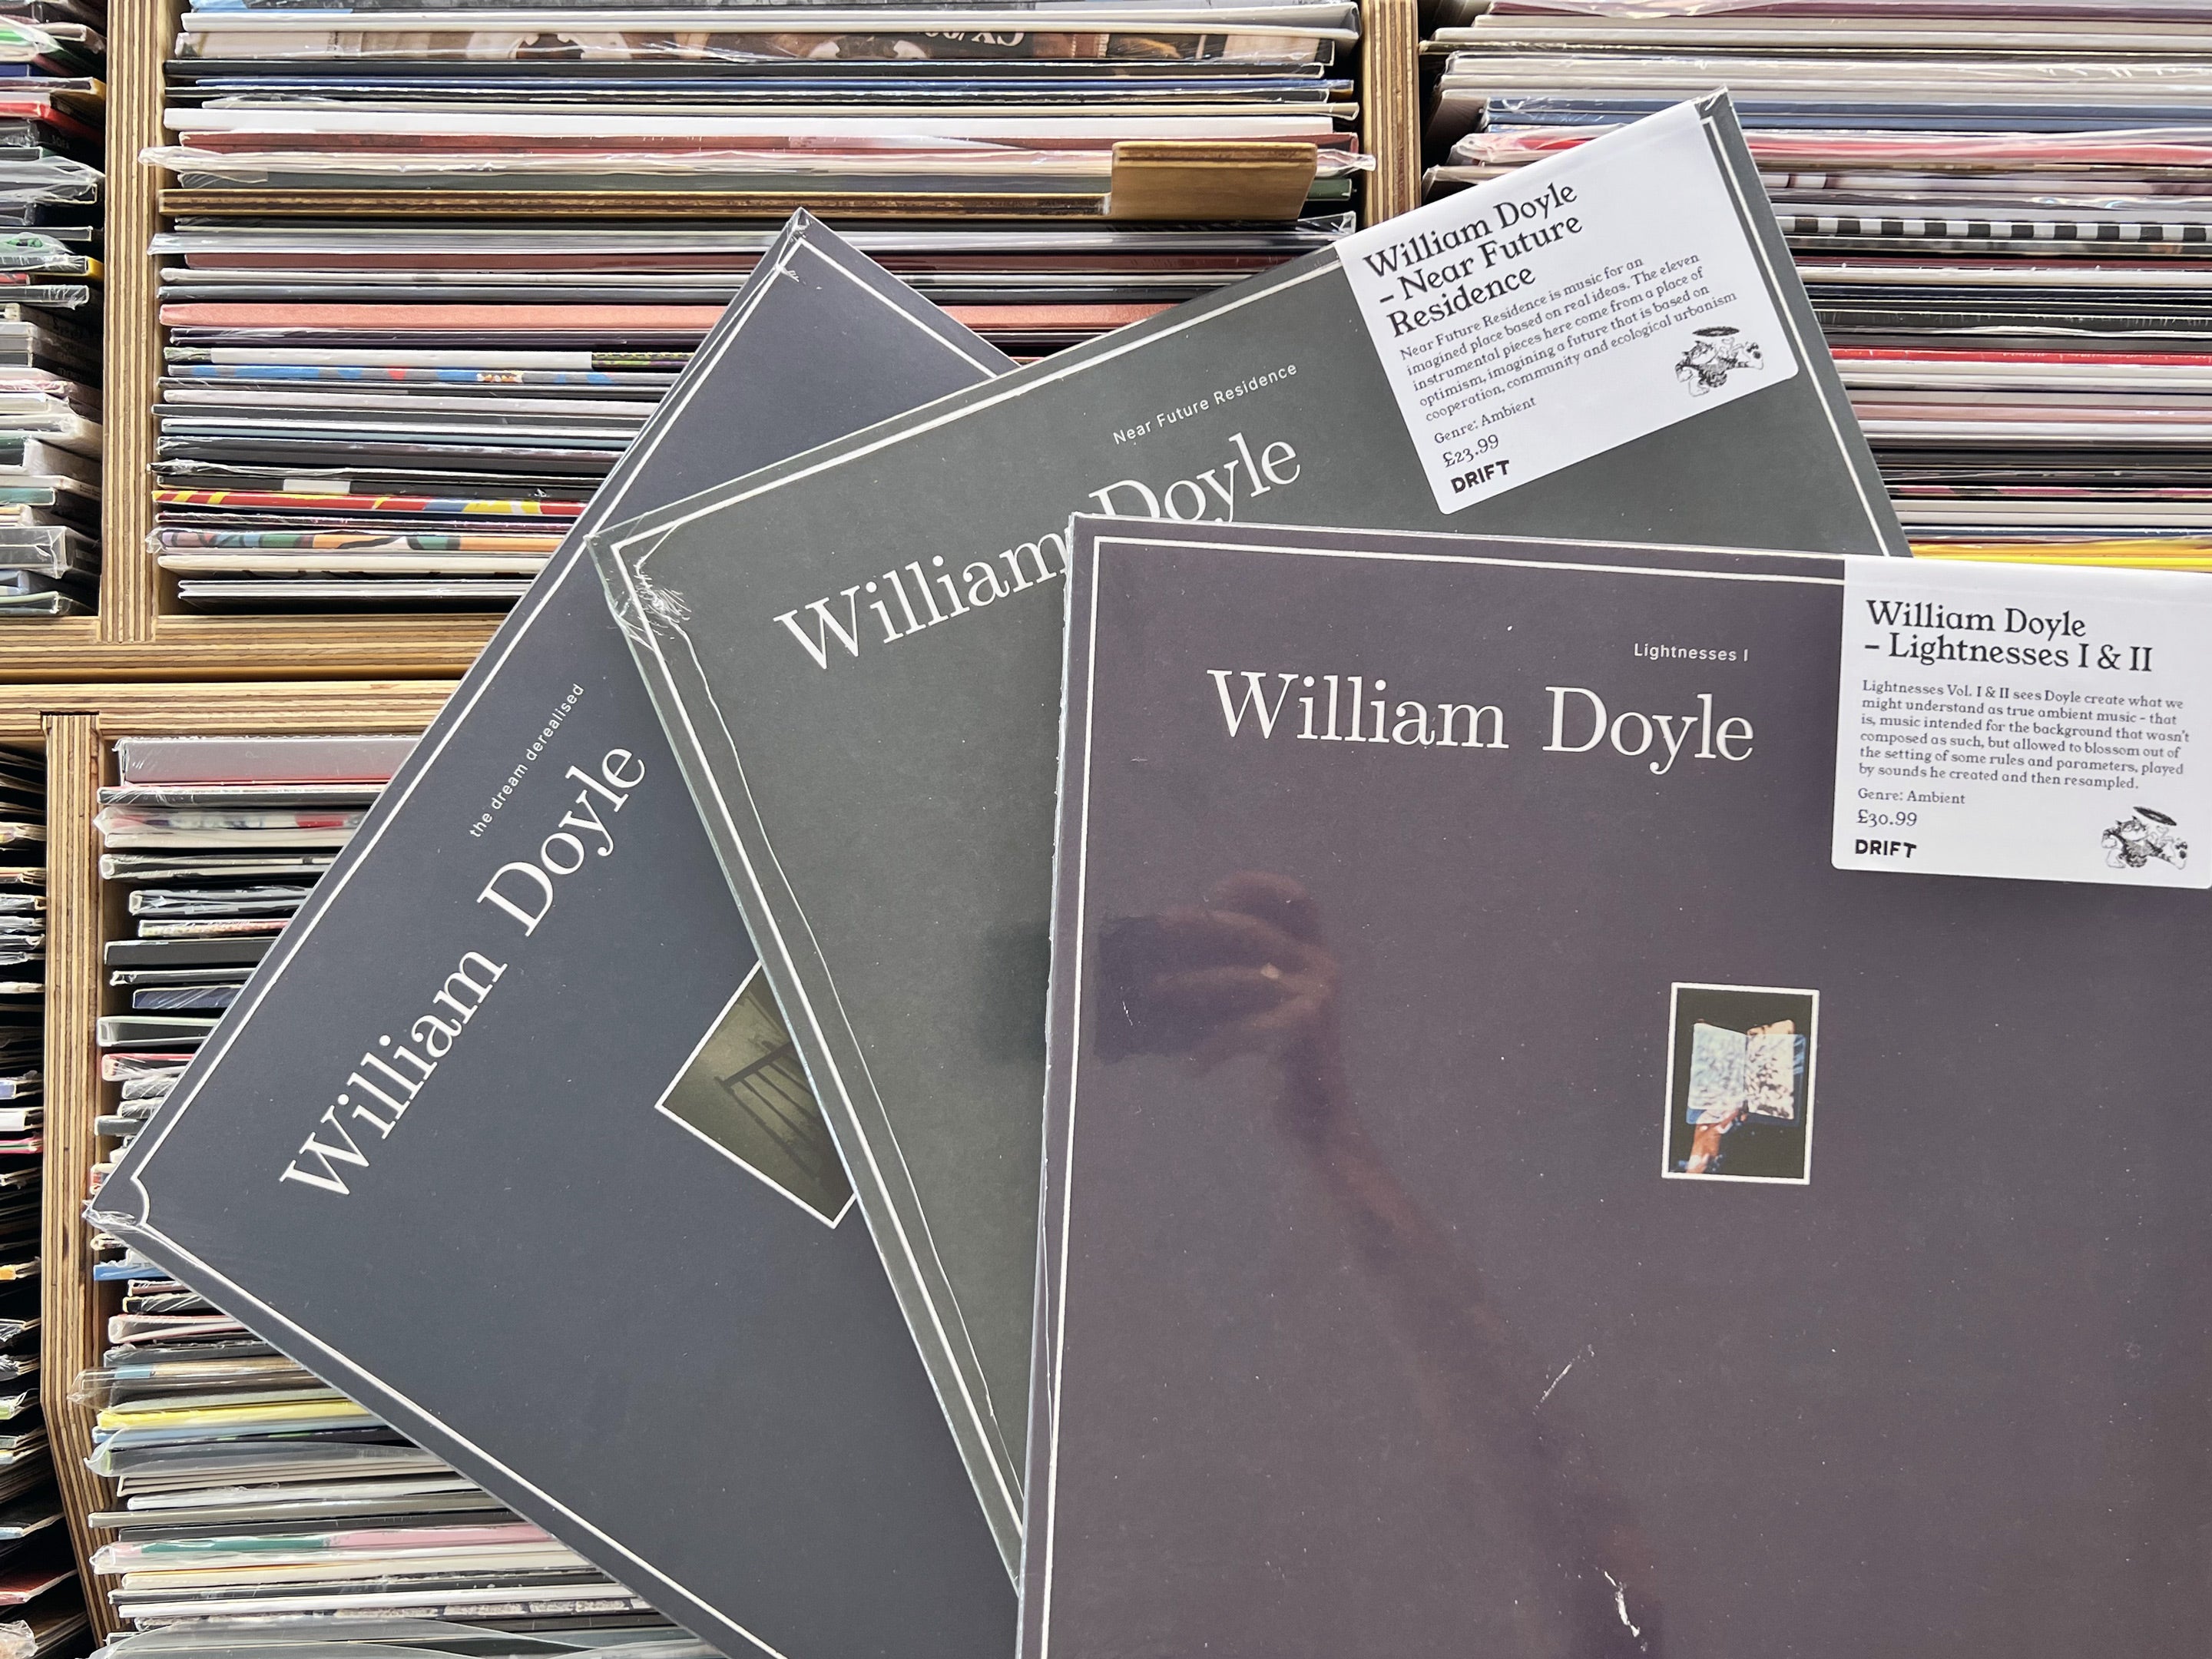 Best New Reissues: William Doyle, R.E.M., Fela Kuti, Cherry Ghost, Nada Surf, Spelling, Nucleus and Larry Young.